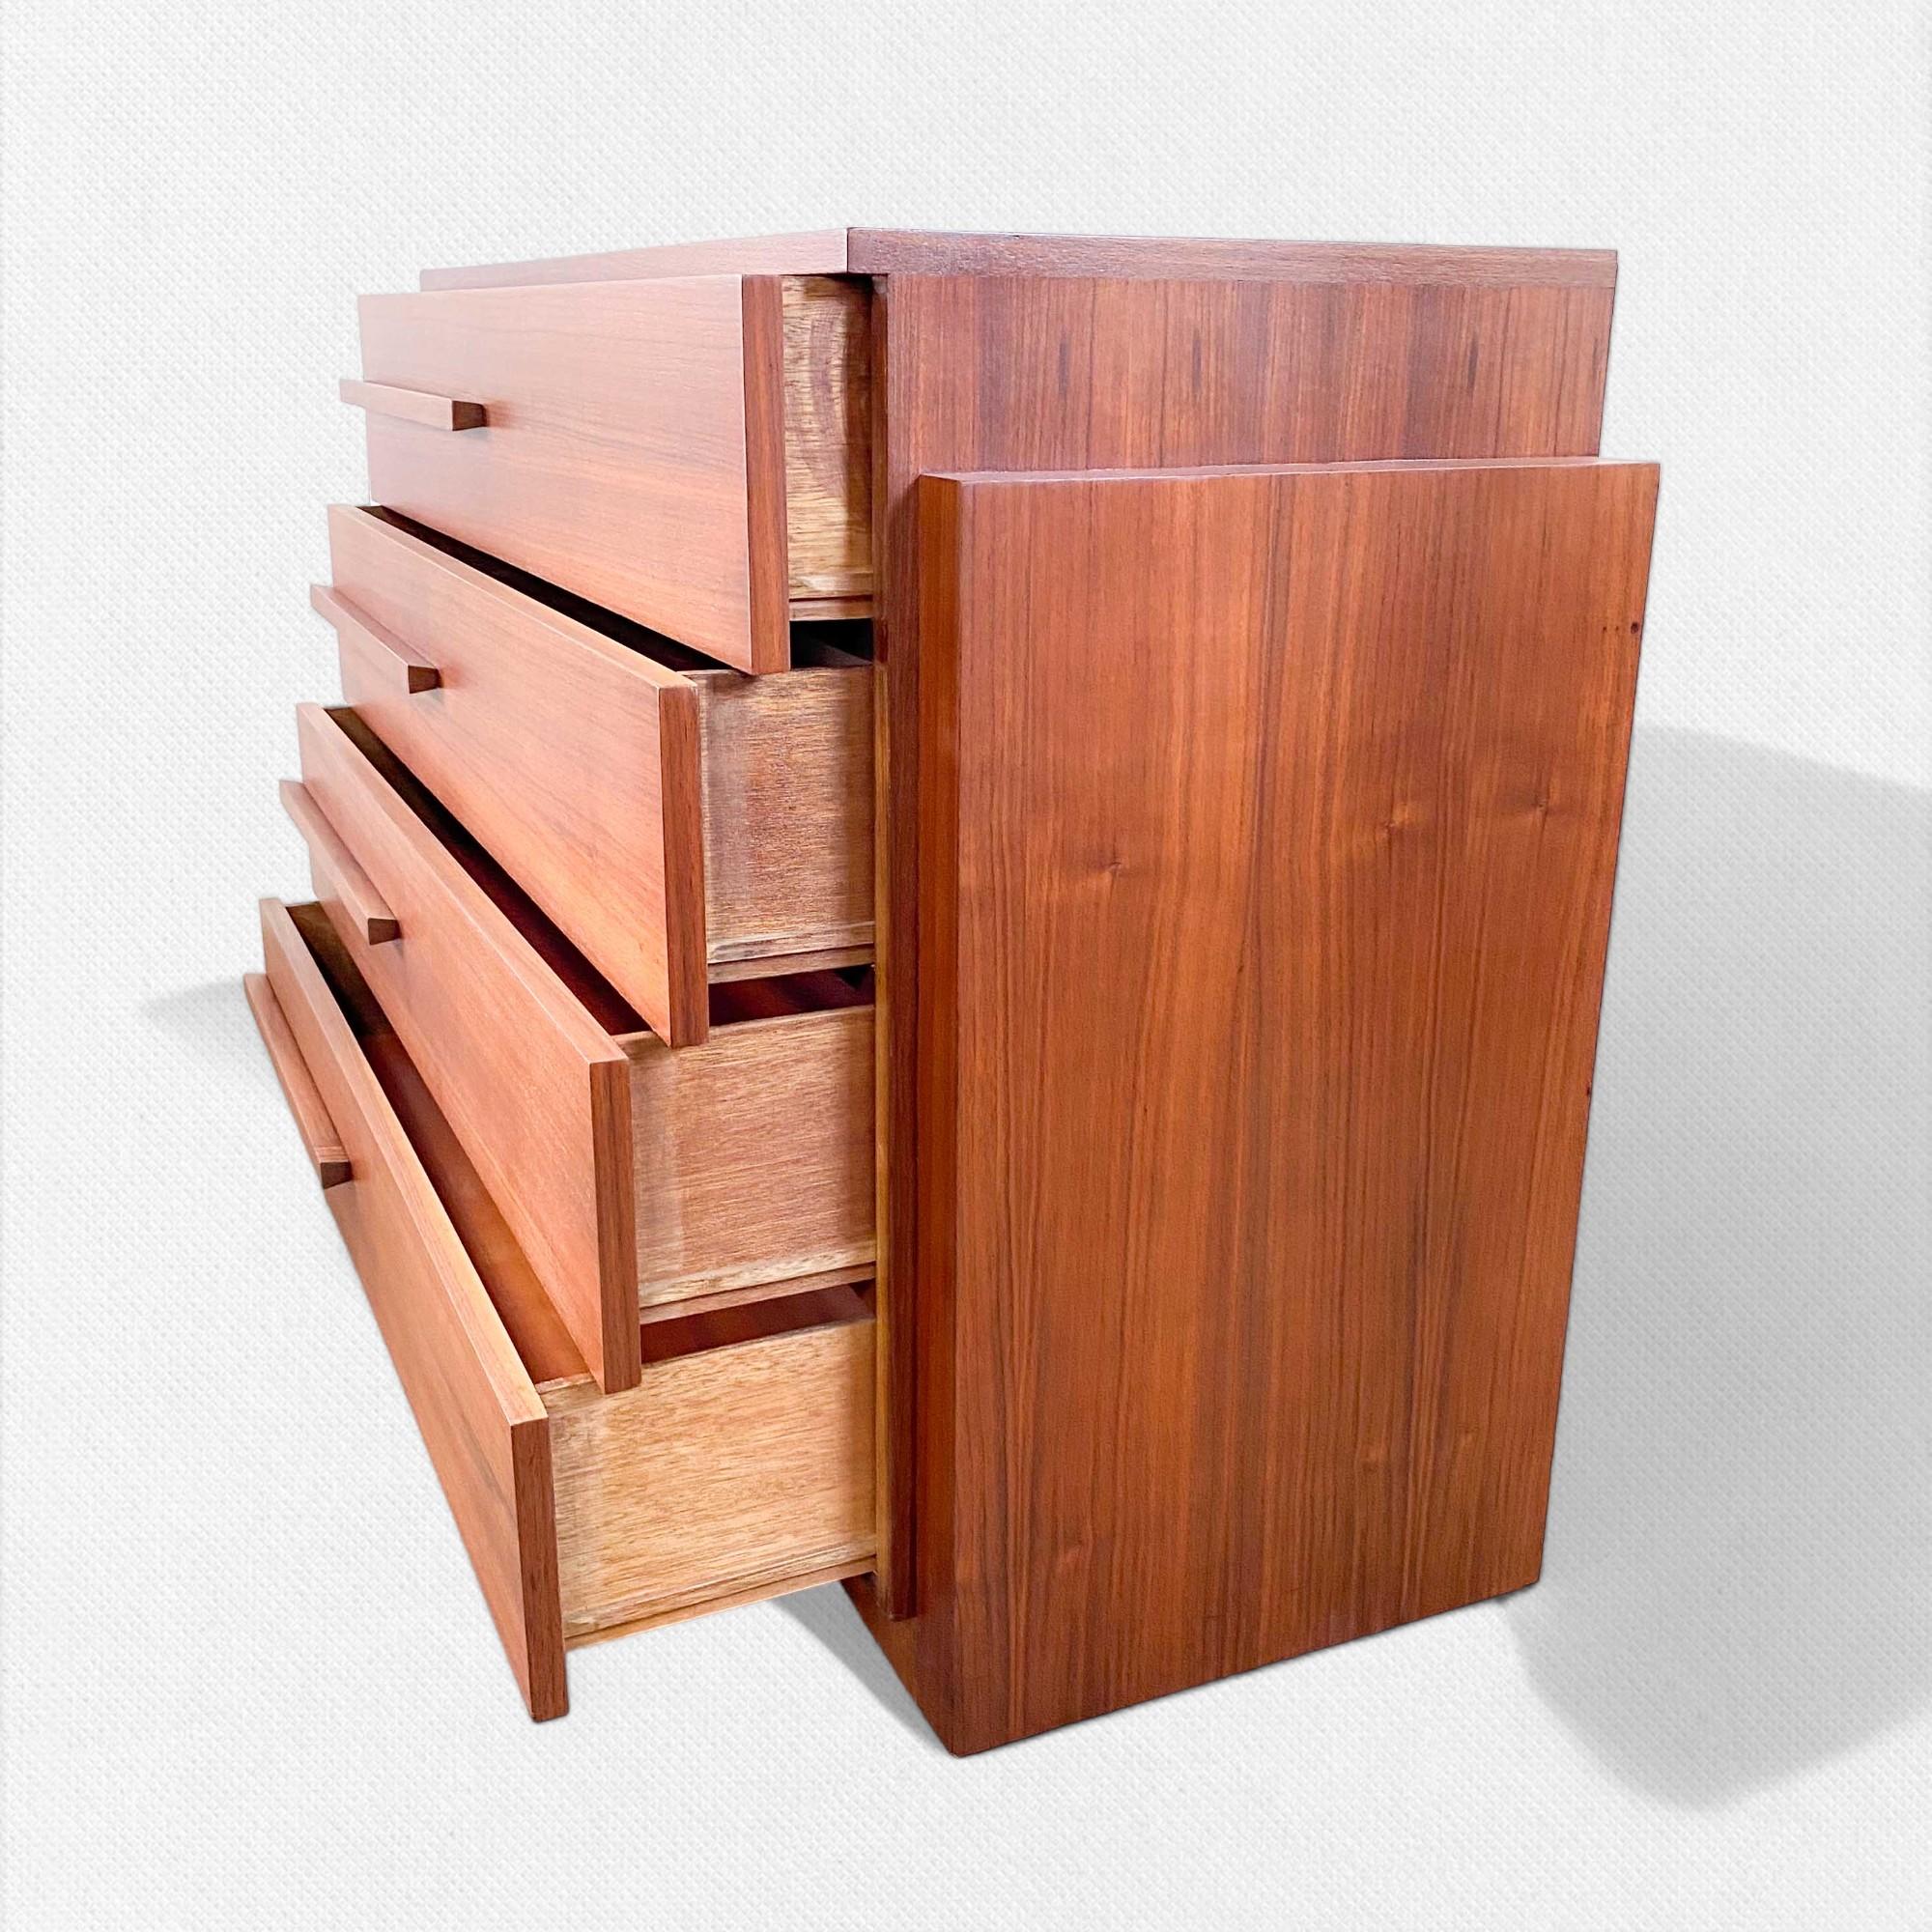 Hand-Crafted American Art Deco Streamline Mahogany Dresser by Modernage, N.Y., 1930s For Sale